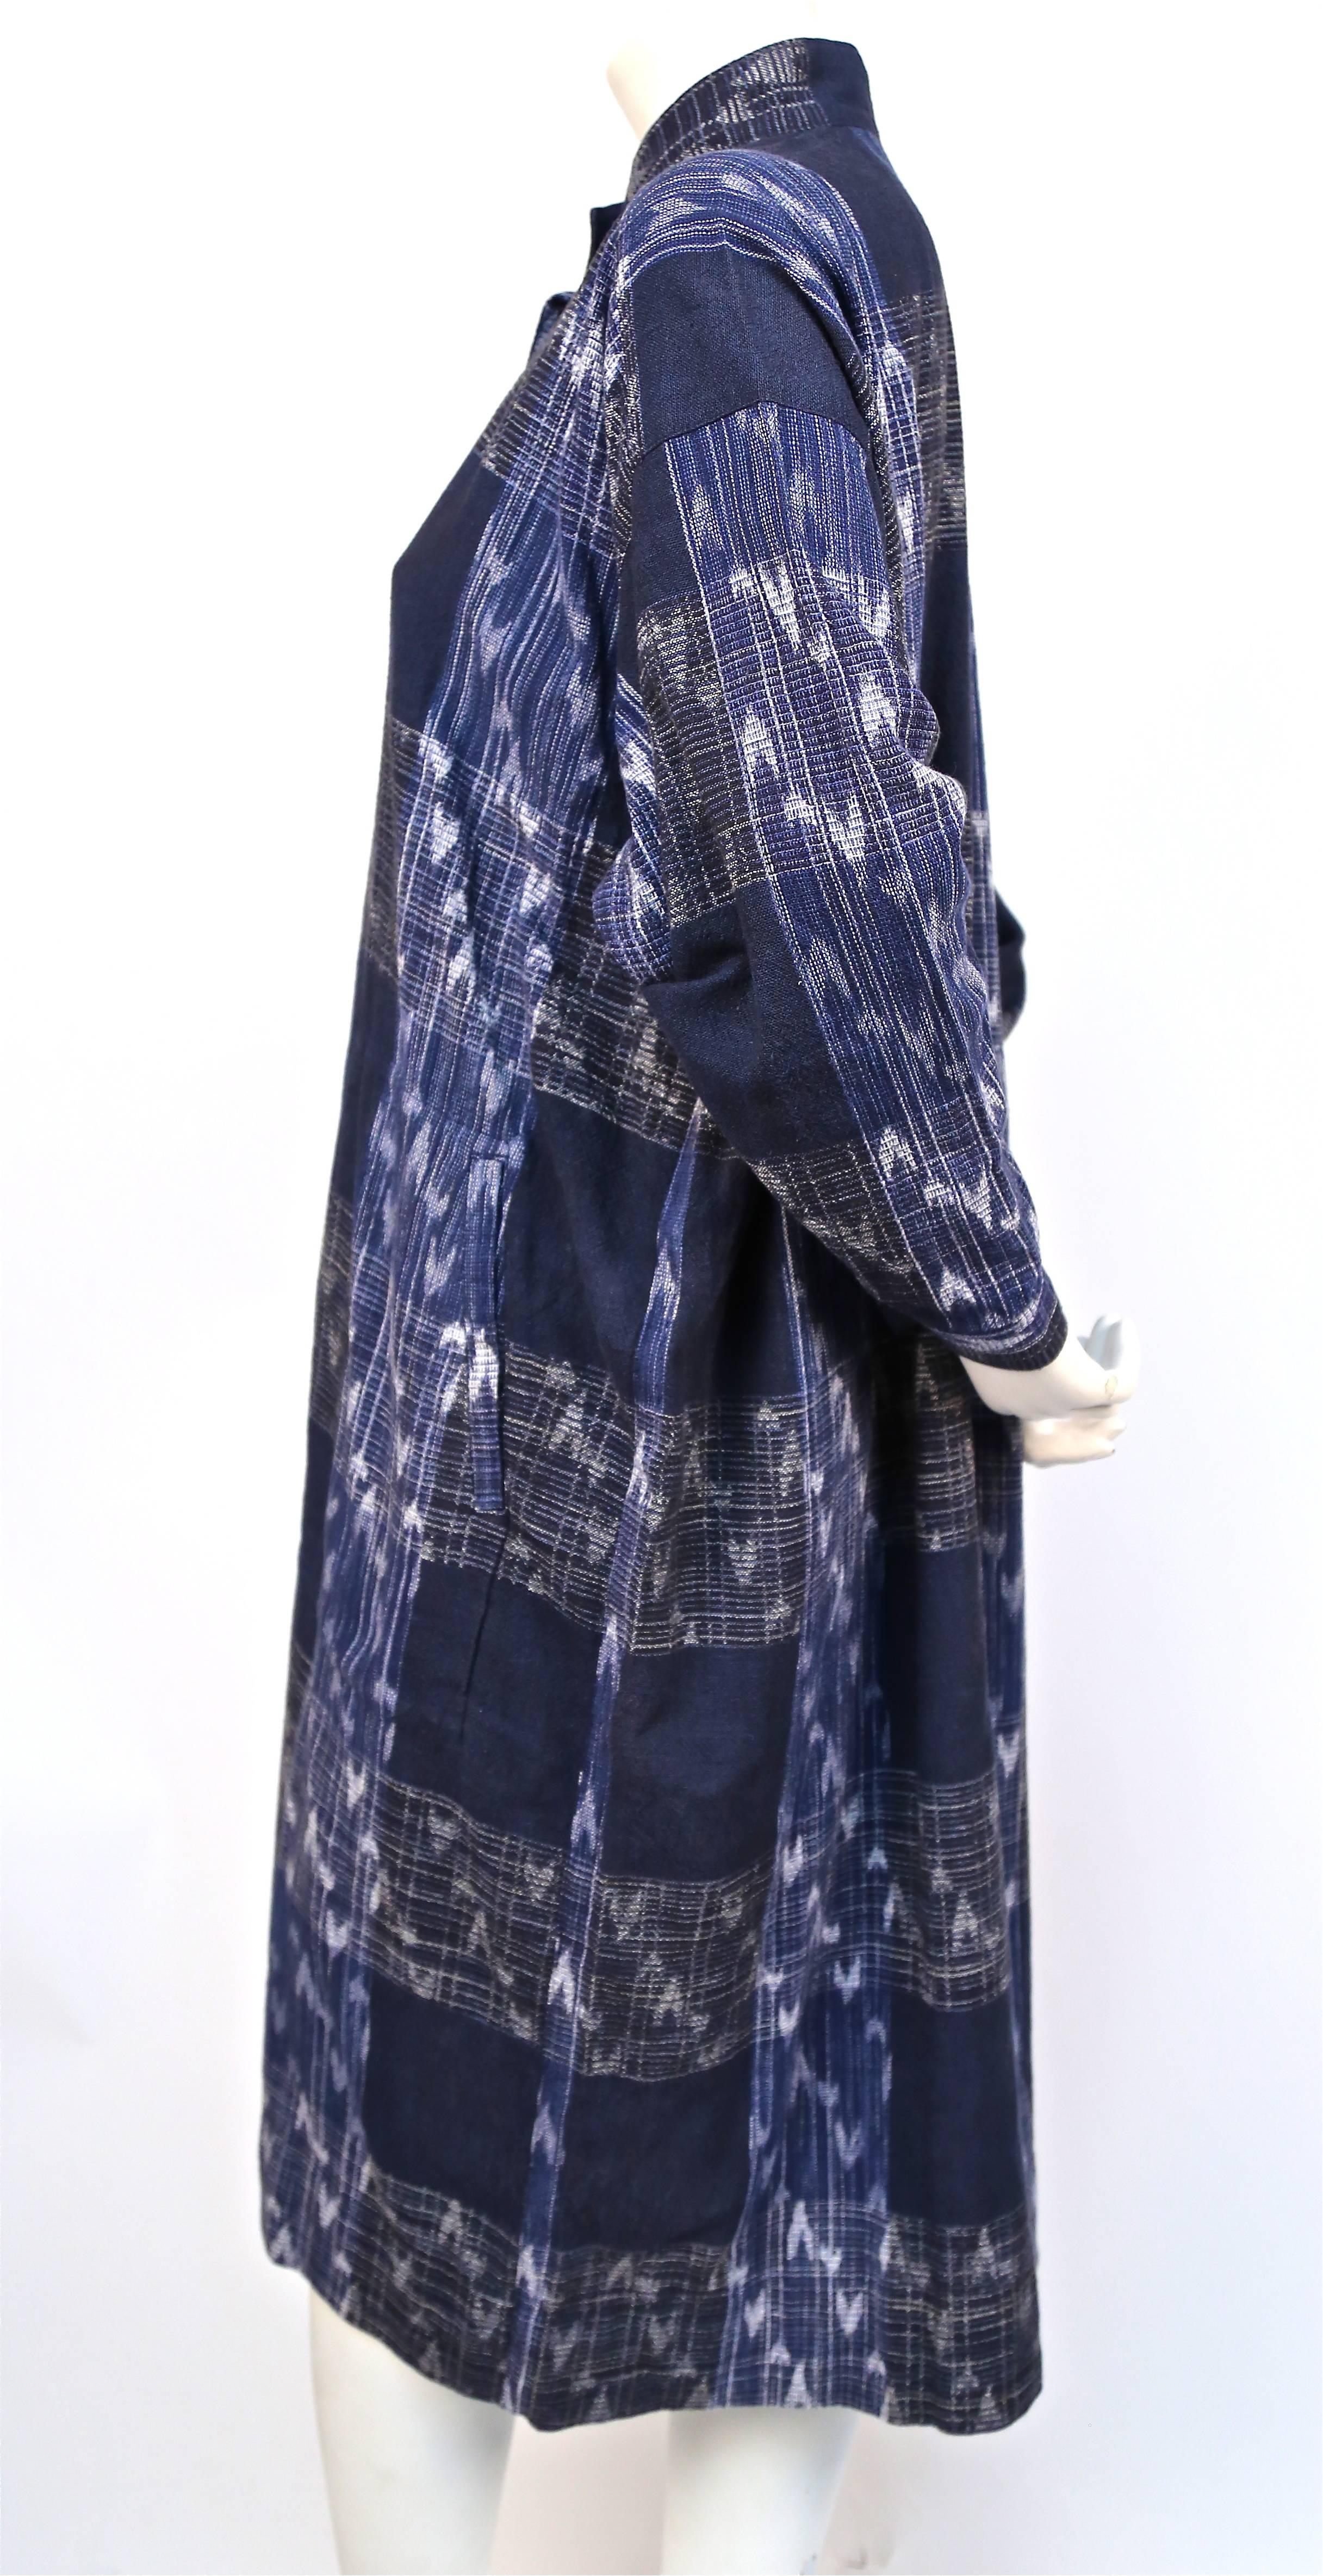 Purple 1980's ISSEY MIYAKE blue Ikat woven dress with wood buttons